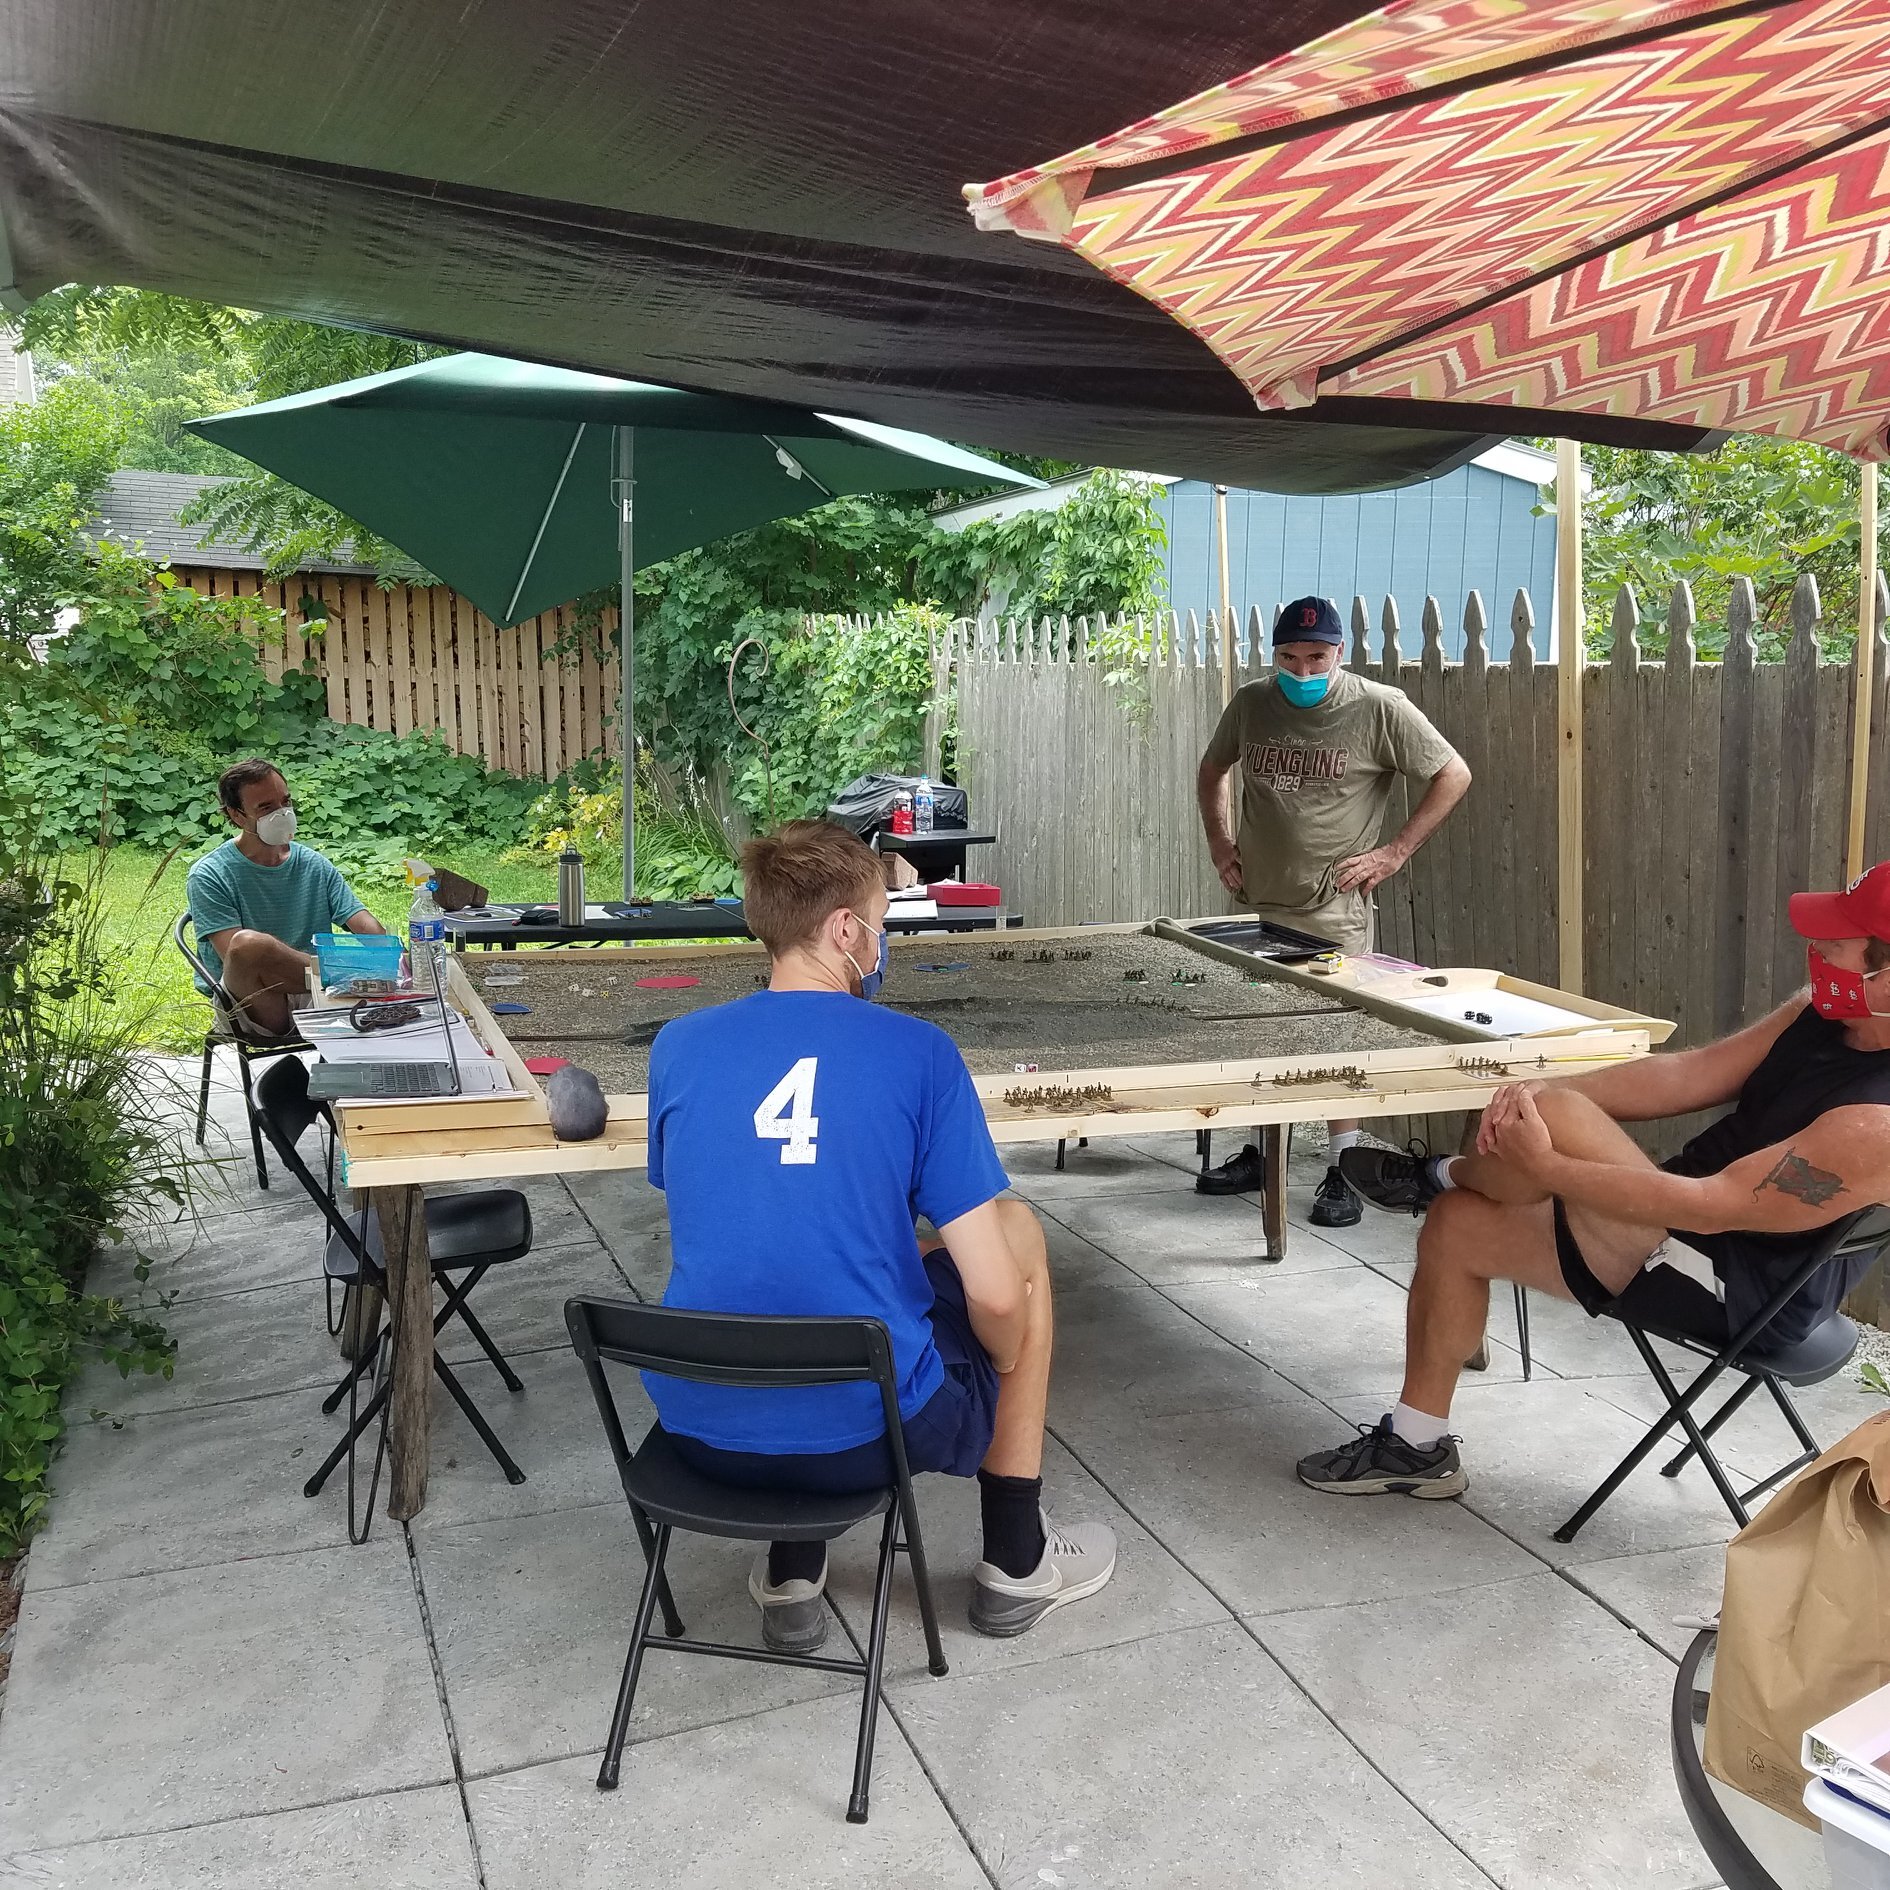 COVID-safe outdoor gaming on the patio of Dan Albrecht with Harry Voelkel, Steve Smith, Steve Emerson and Brett McLay